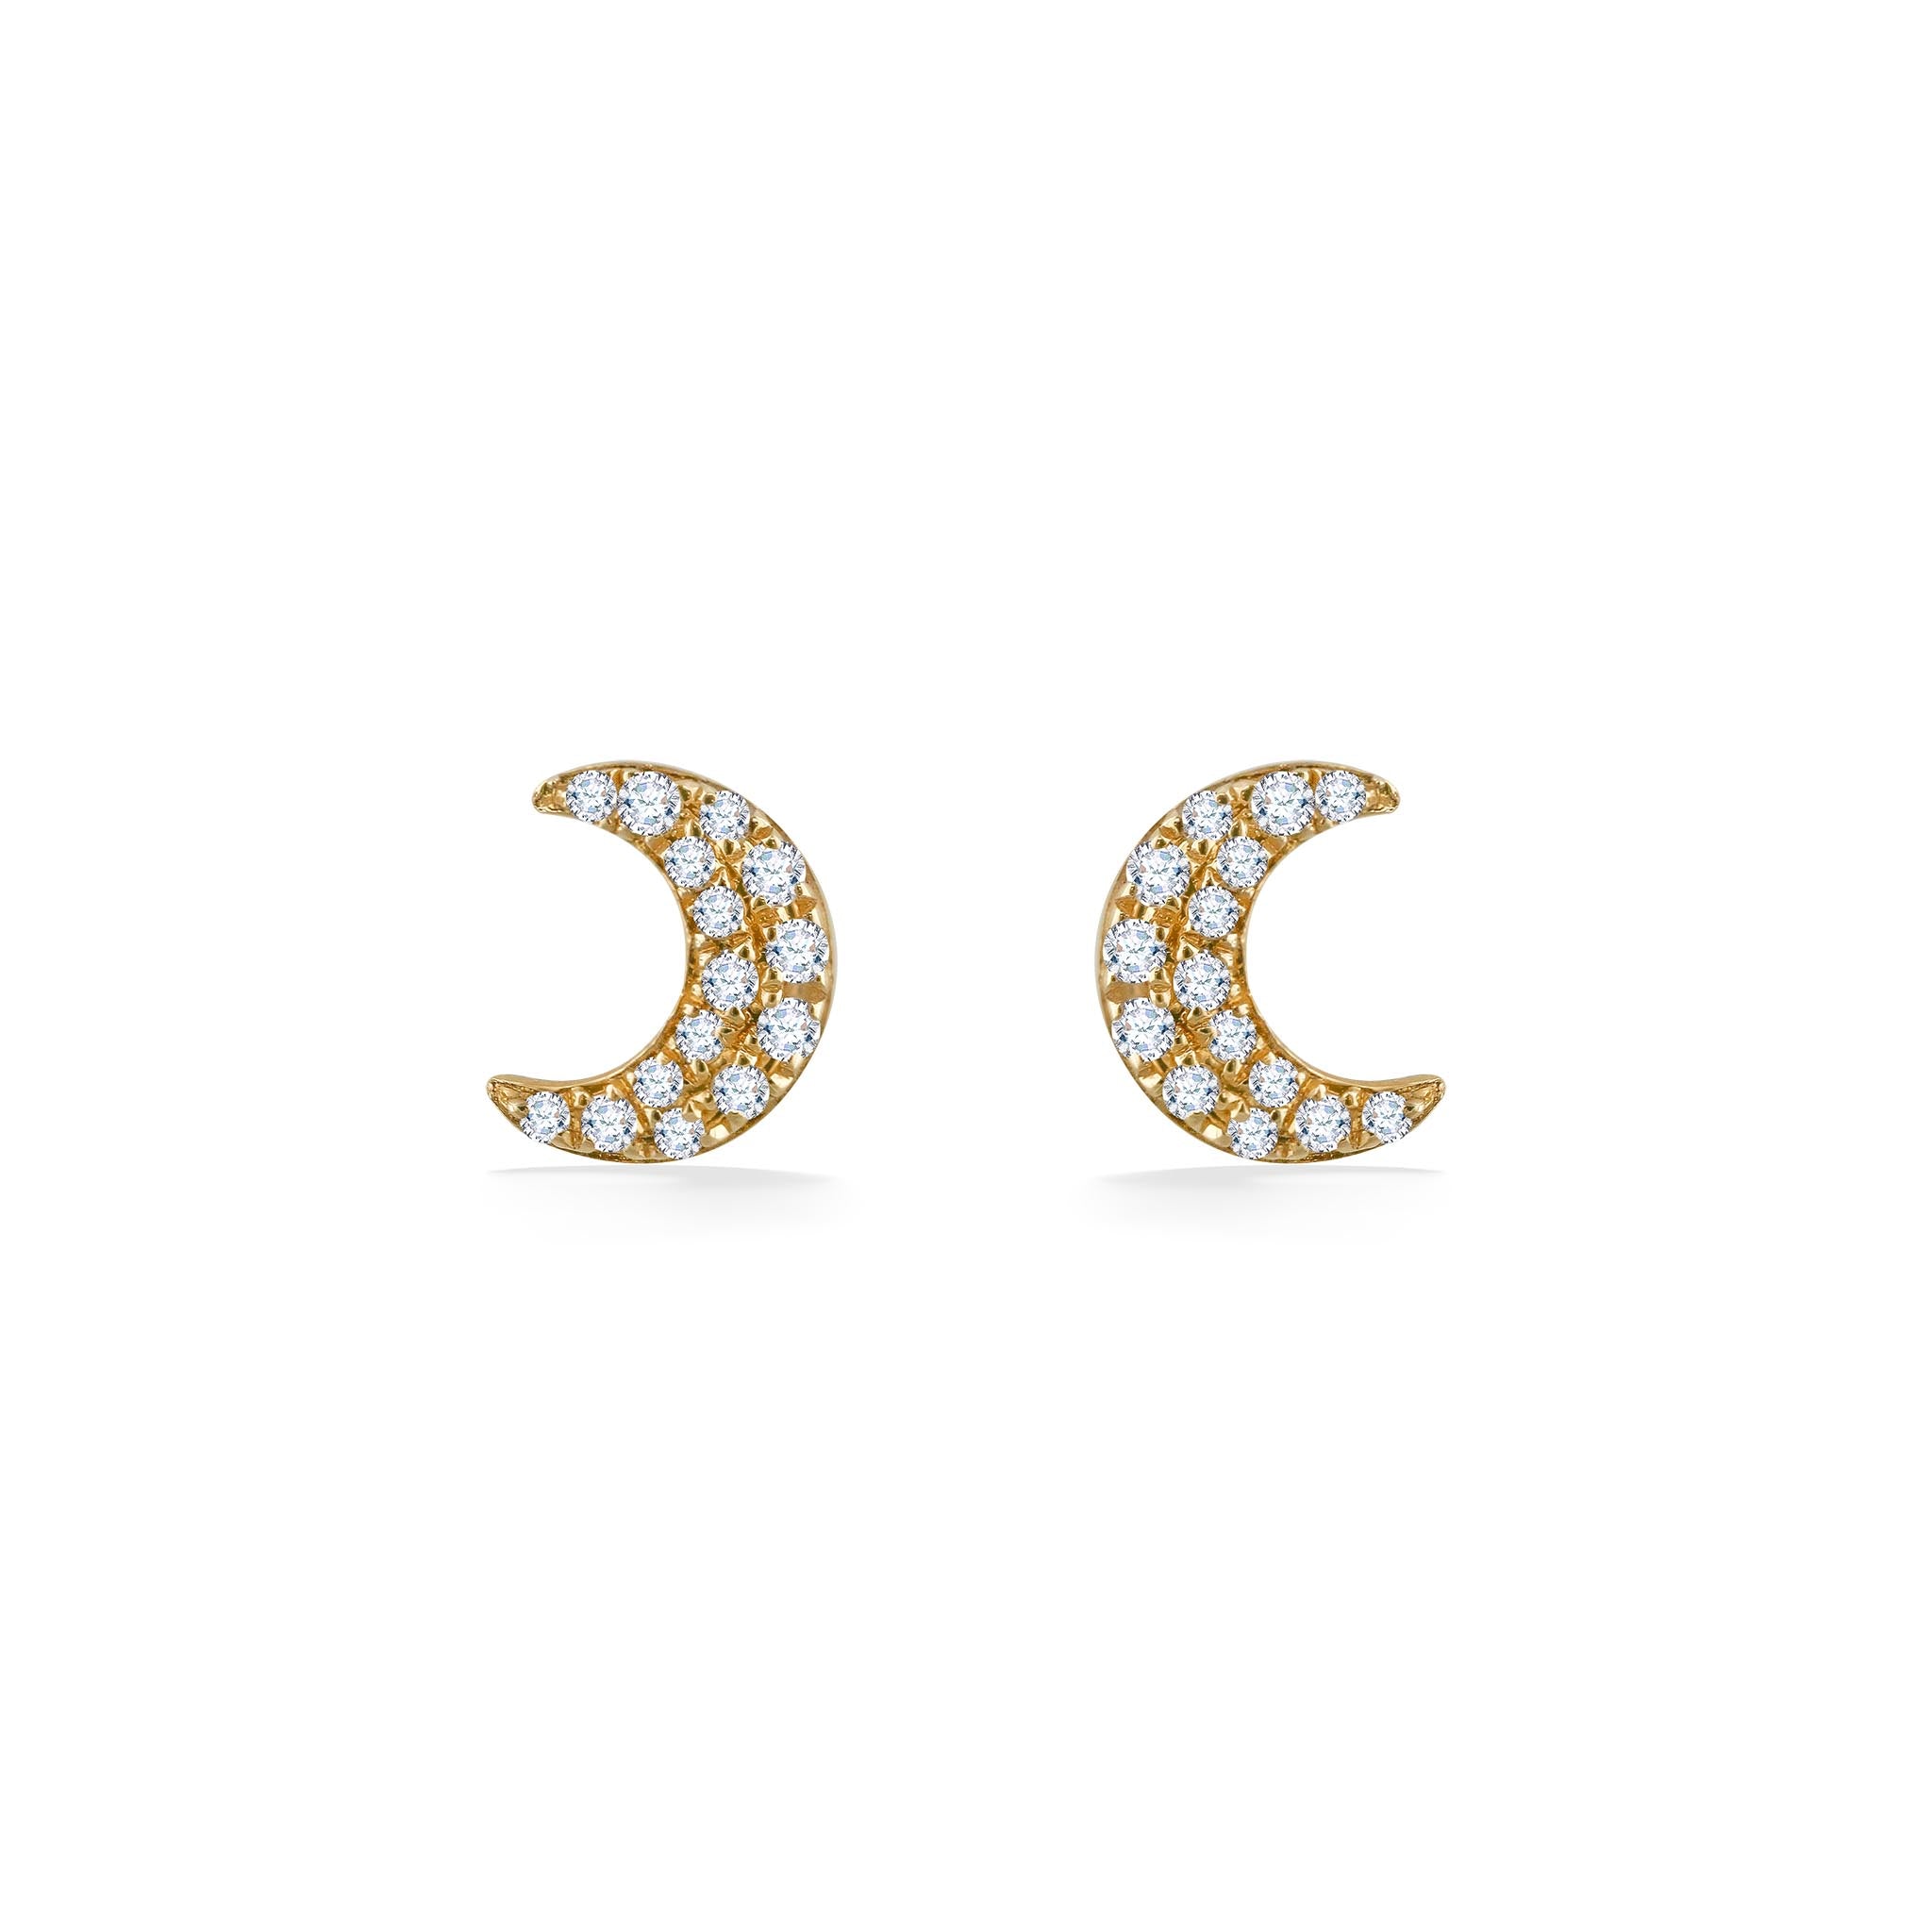 Half Moon With Stars Earrings, Crescent Studs, 9K 14K 18K Solid Gold,  Women's Gift, Celestial Jewelry - Etsy